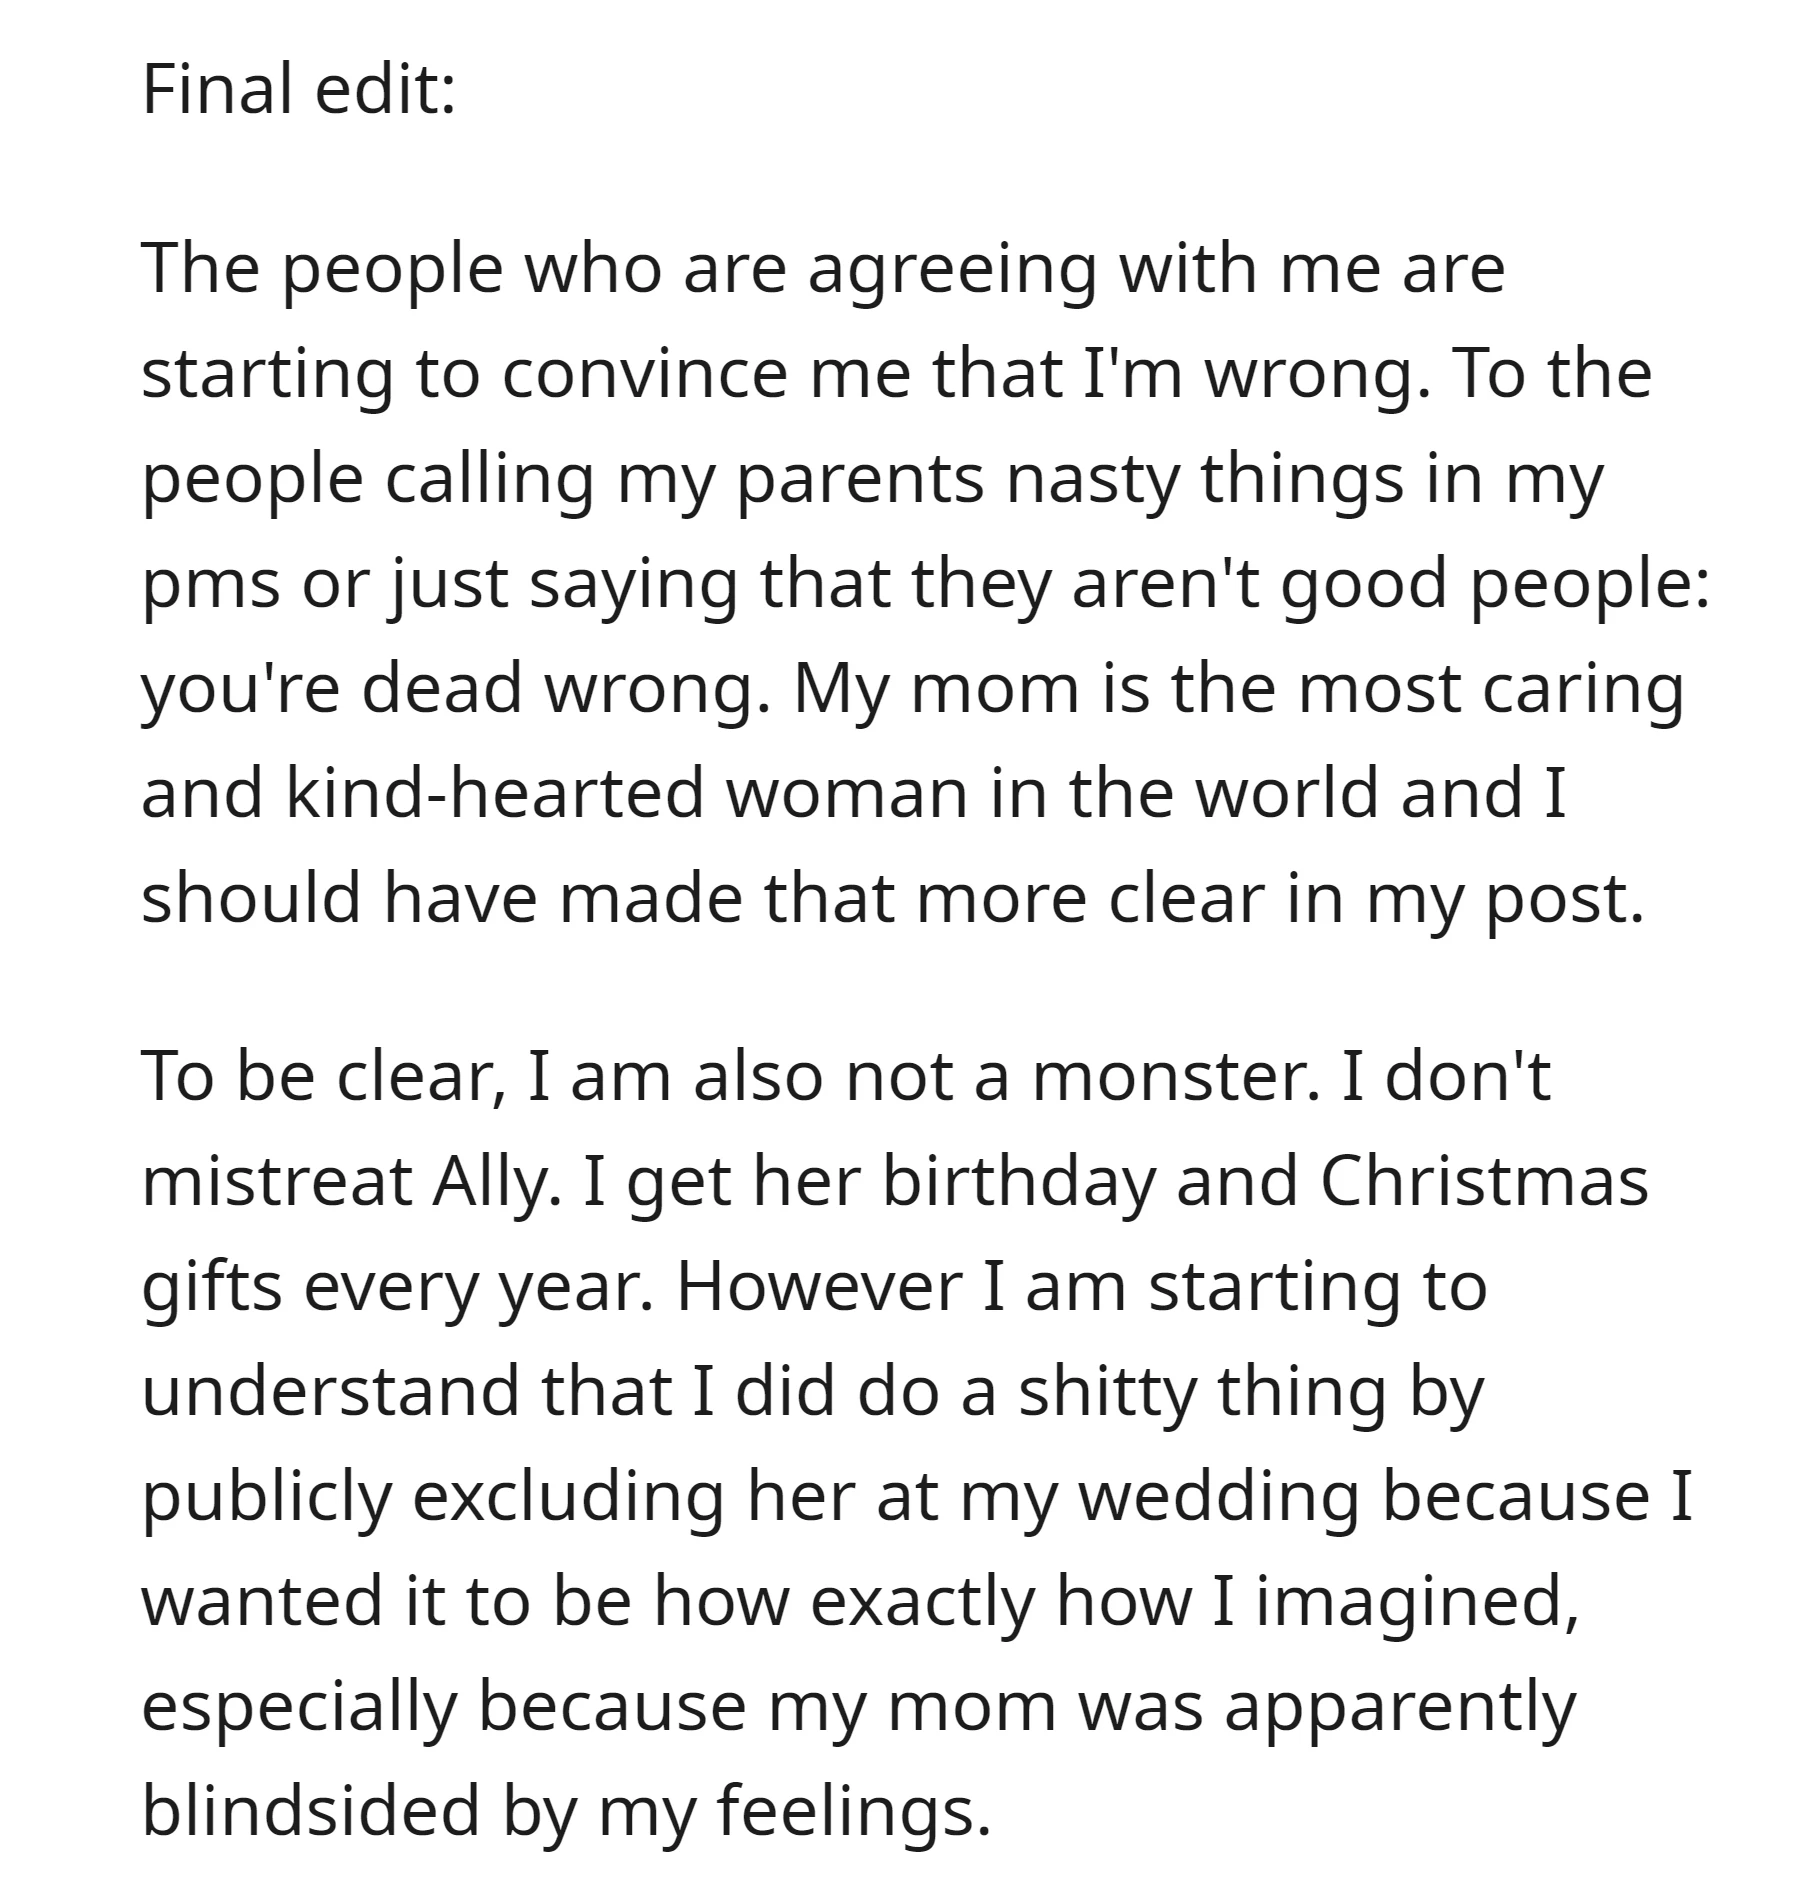 OP acknowledges the potential wrongfulness of publicly excluding Ally at the wedding